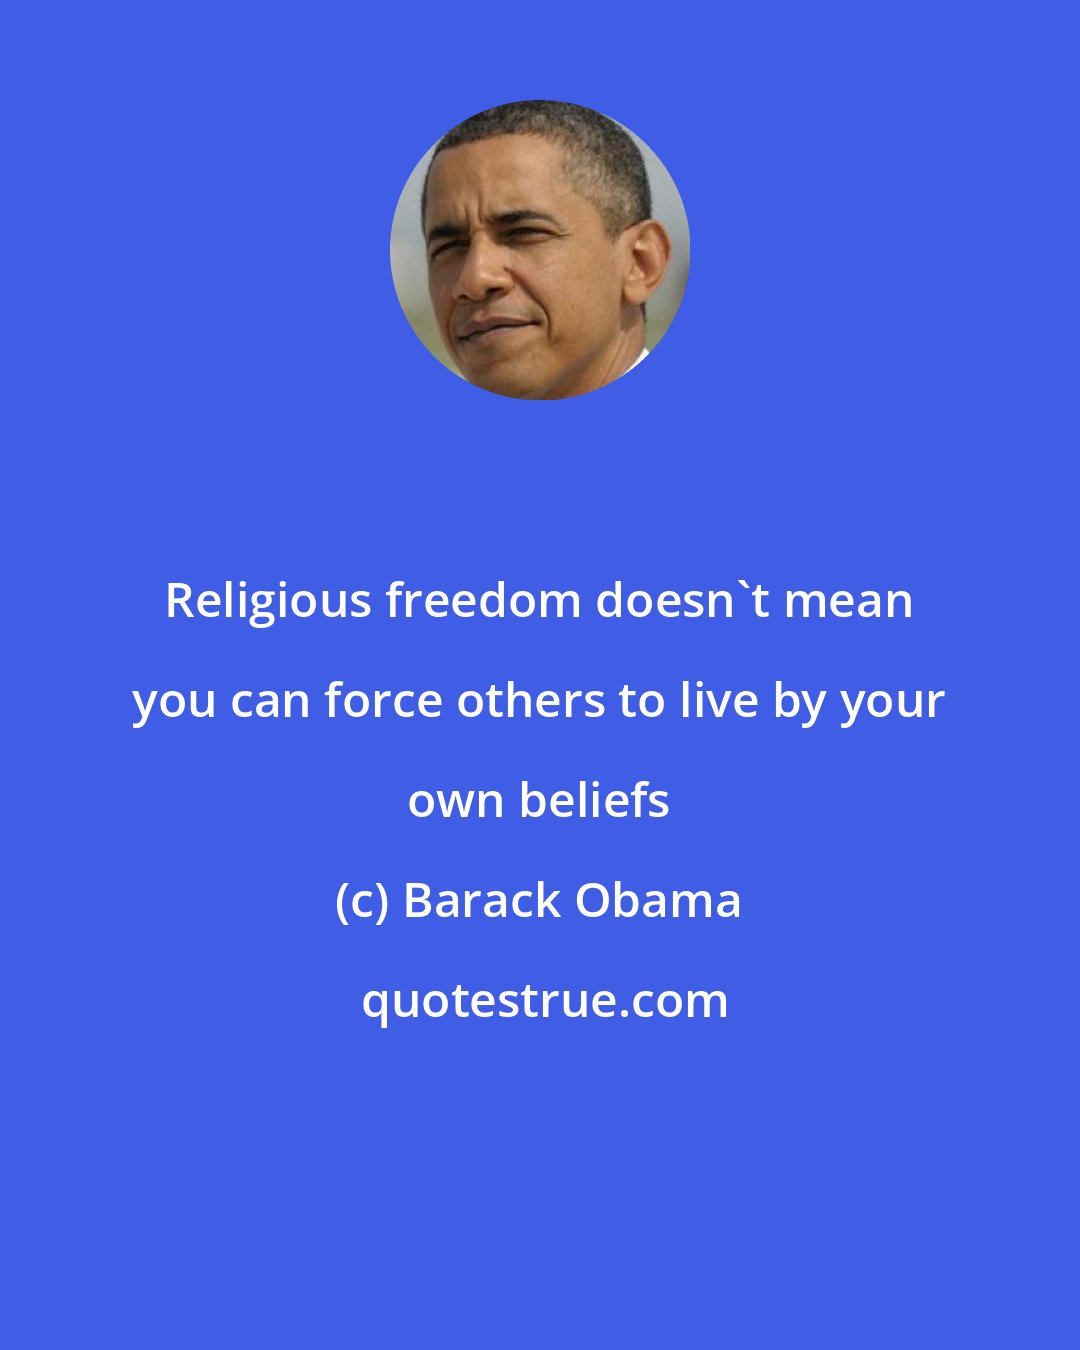 Barack Obama: Religious freedom doesn't mean you can force others to live by your own beliefs